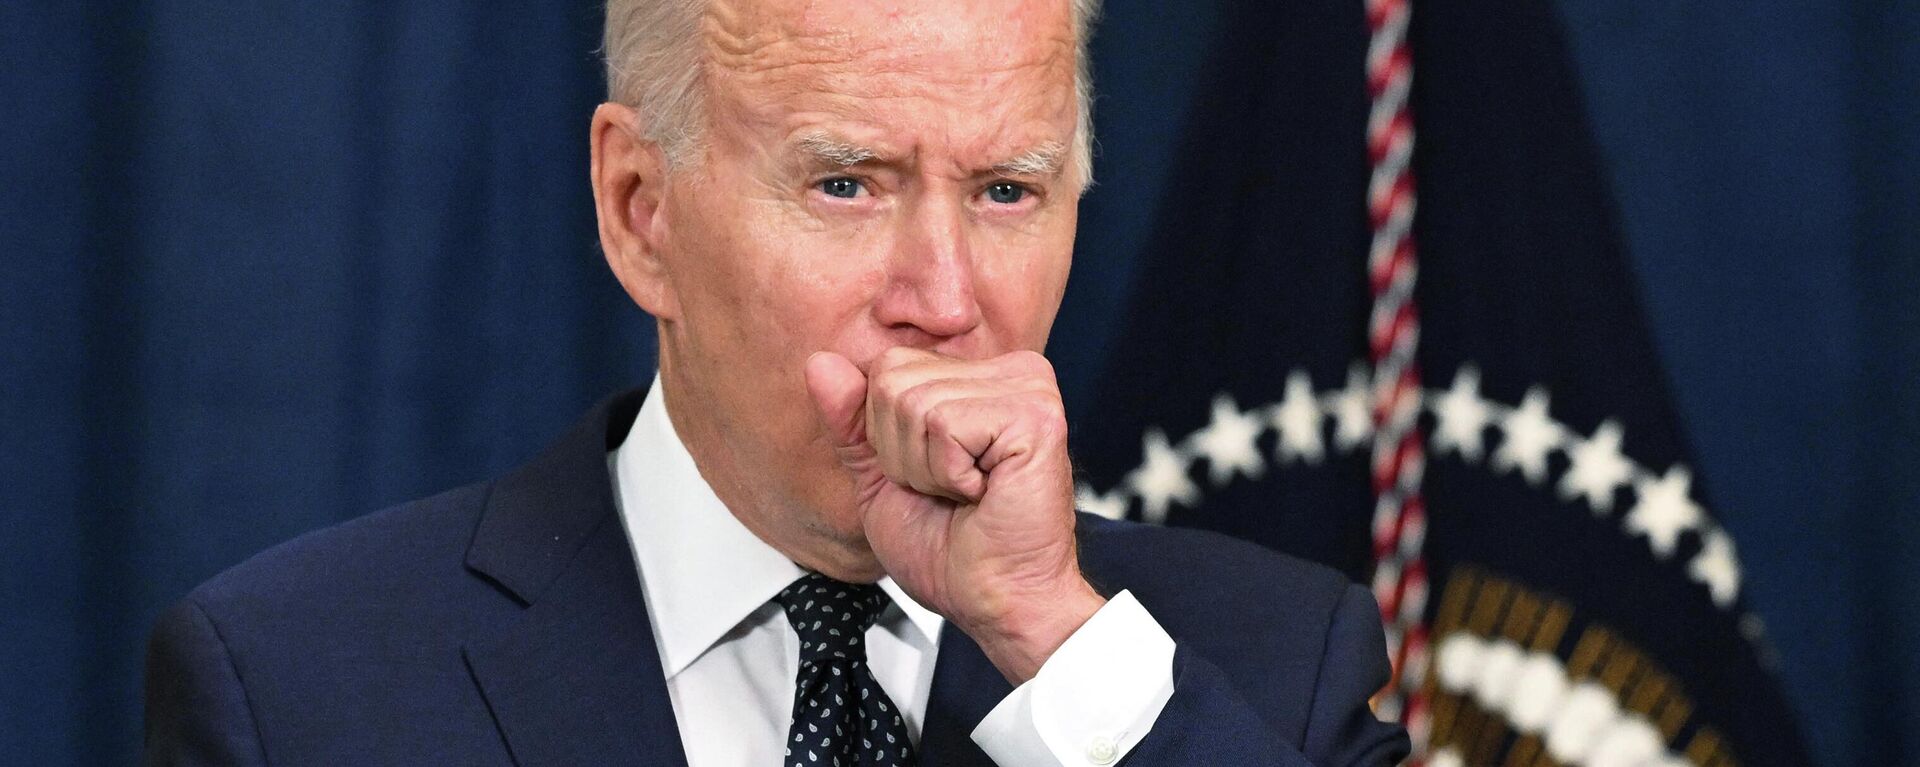 In this file photo taken on July 15, 2022, US President Joe Biden coughs as he speaks to the traveling press after taking part in a working session with Saudi Arabia's Crown Prince Mohammed bin Salman at the Al Salam Royal Palace in Jeddah, Saudi Arabia - Sputnik International, 1920, 02.08.2022